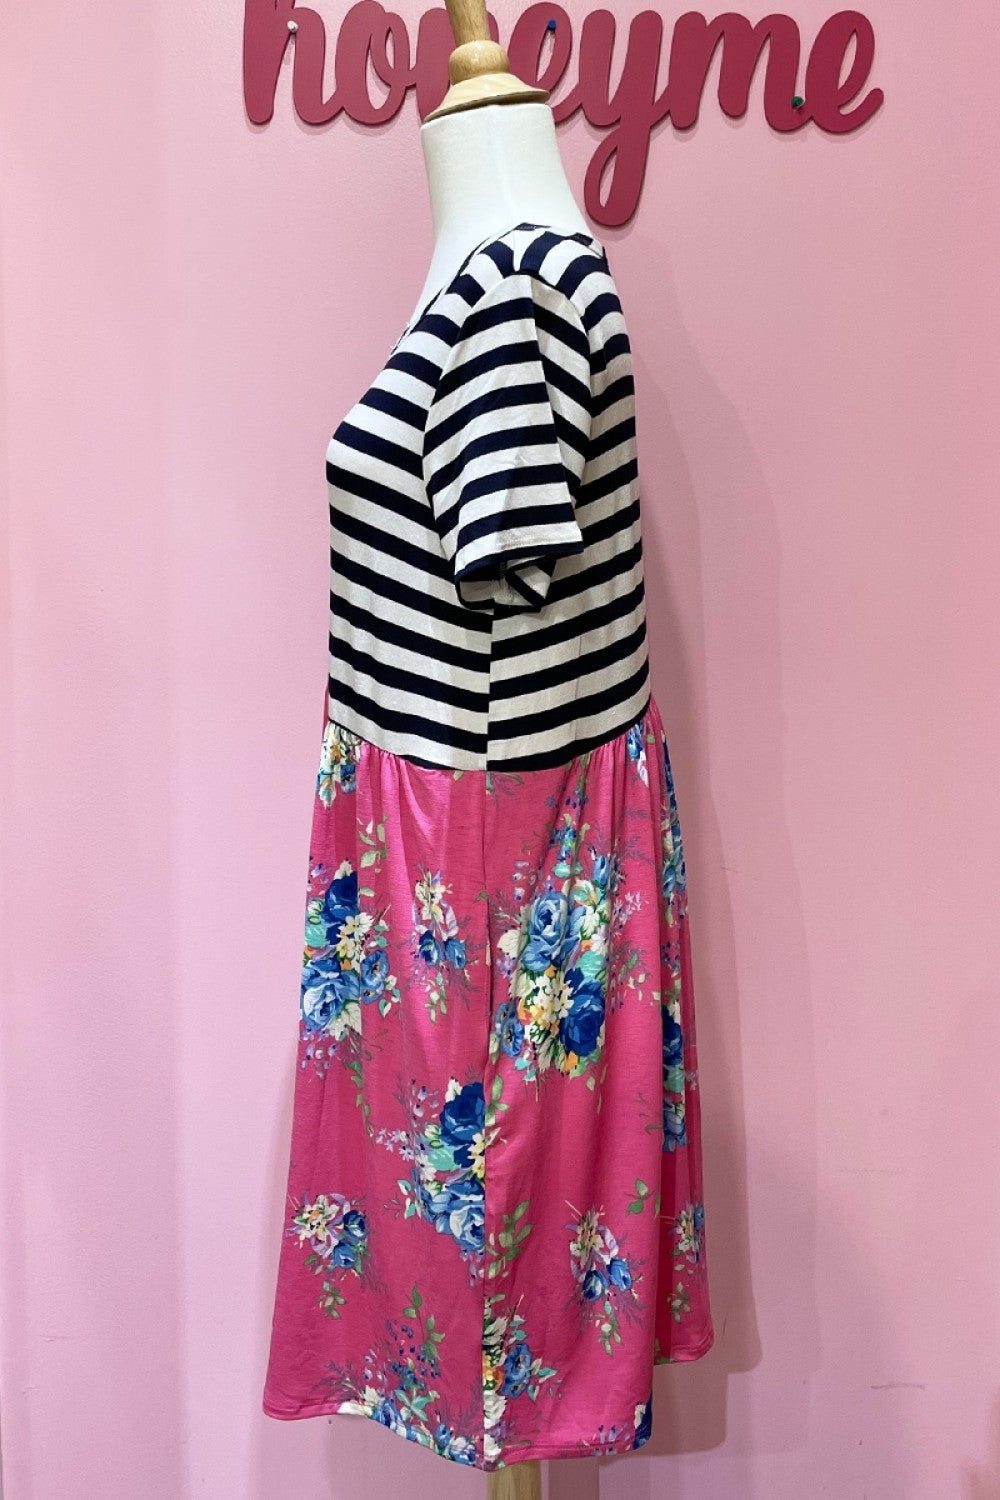 Load image into Gallery viewer, Short Sleeve Stripe and Pink Floral Dress
